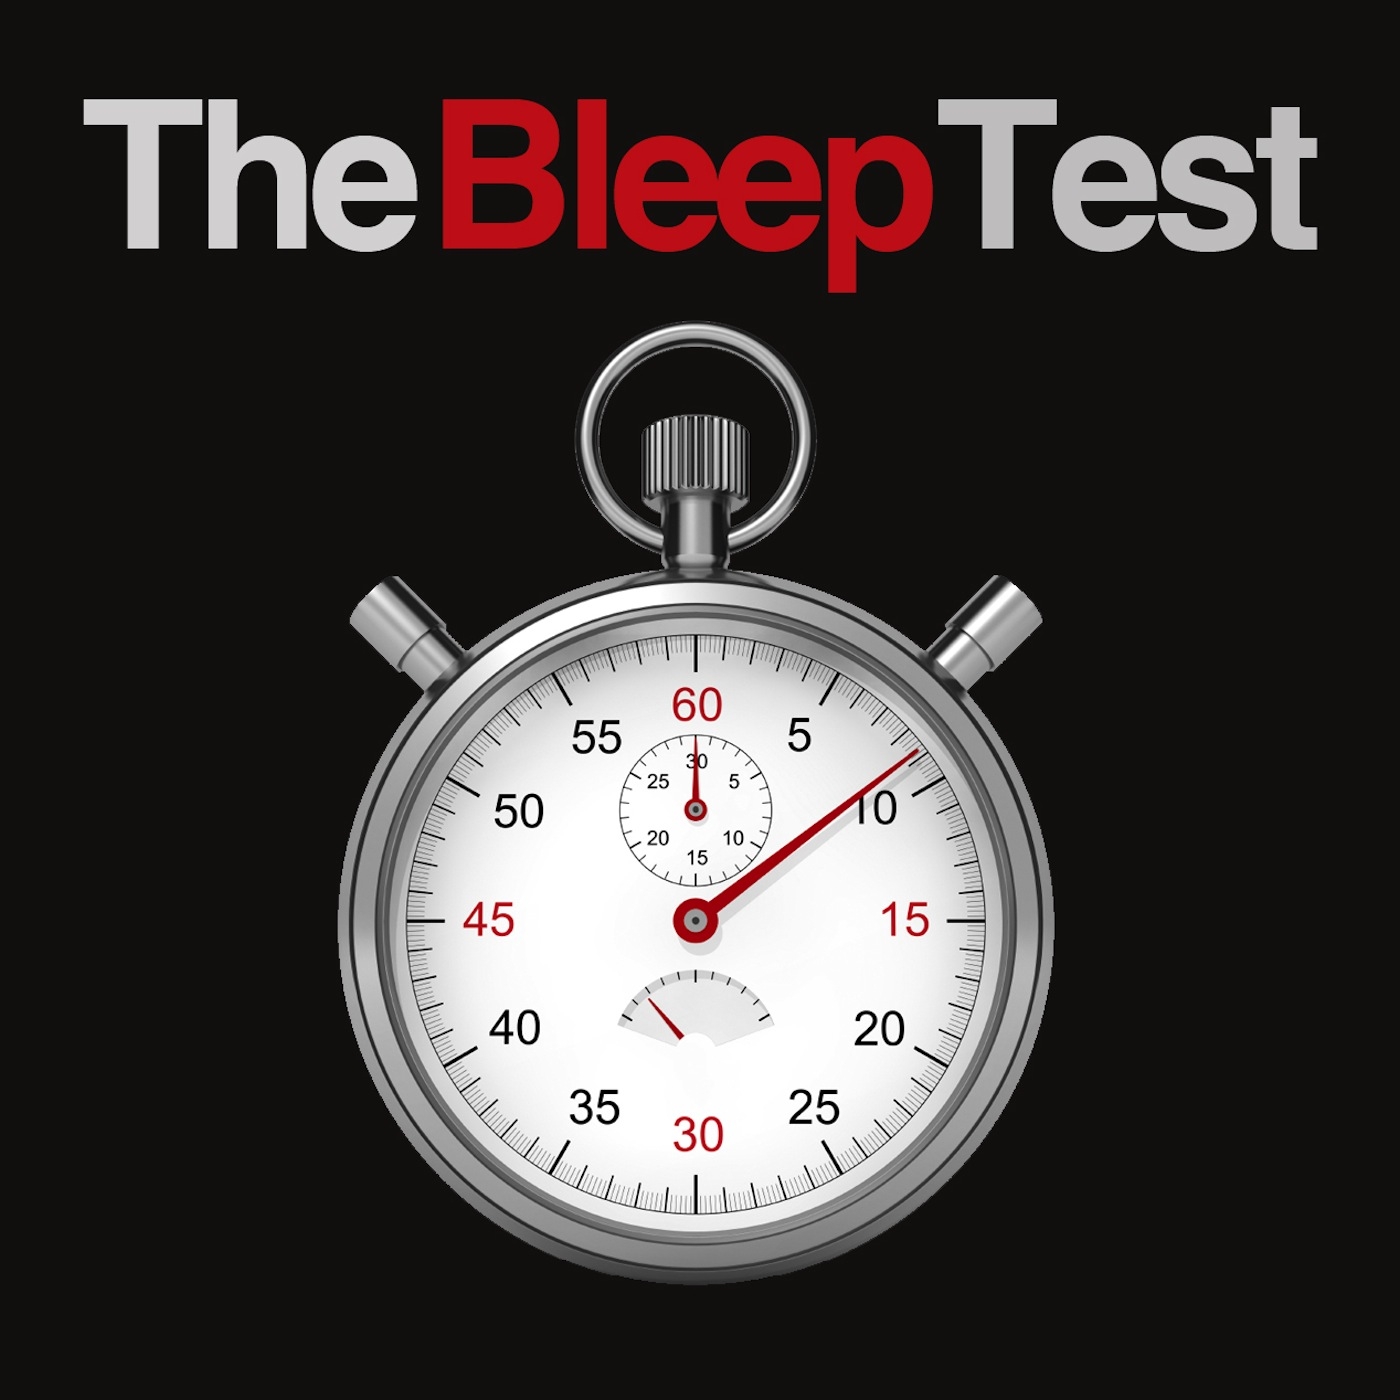 The Bleep Test: 15 Metre (Complete Test)